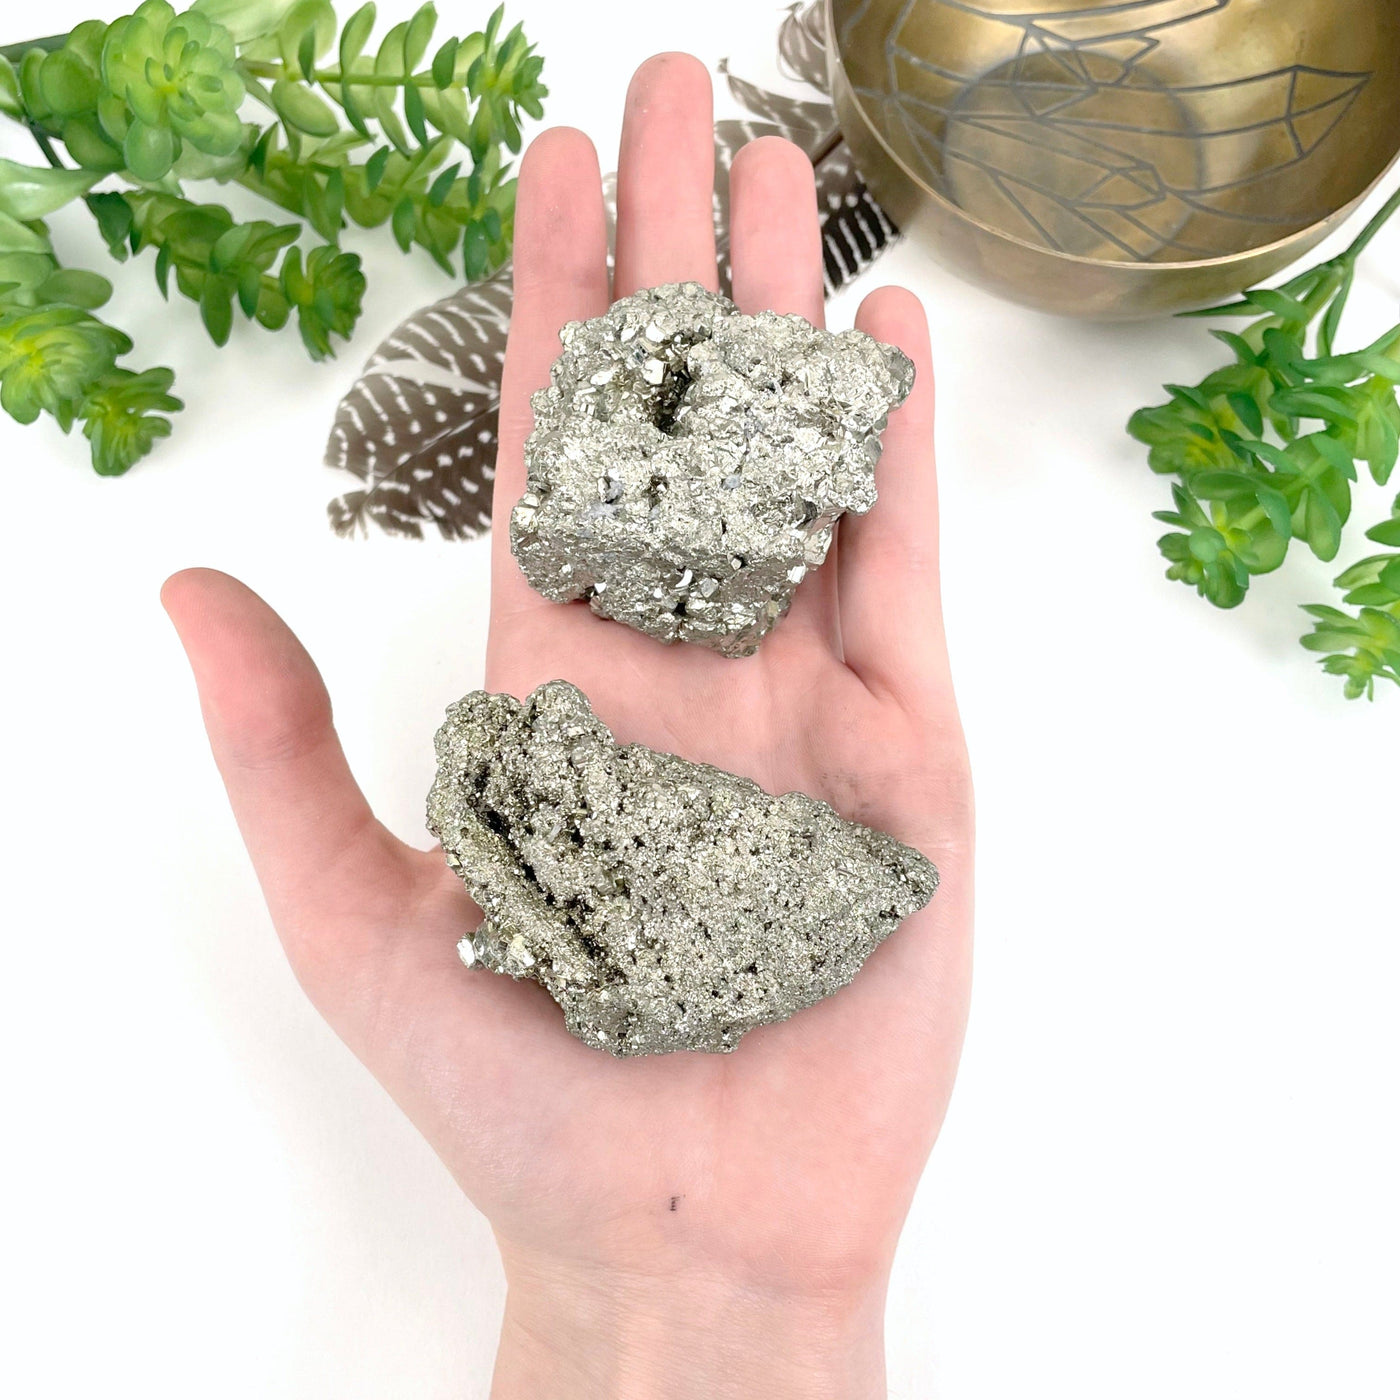 rough pyrite stone 2pc set in hand for approximate size reference